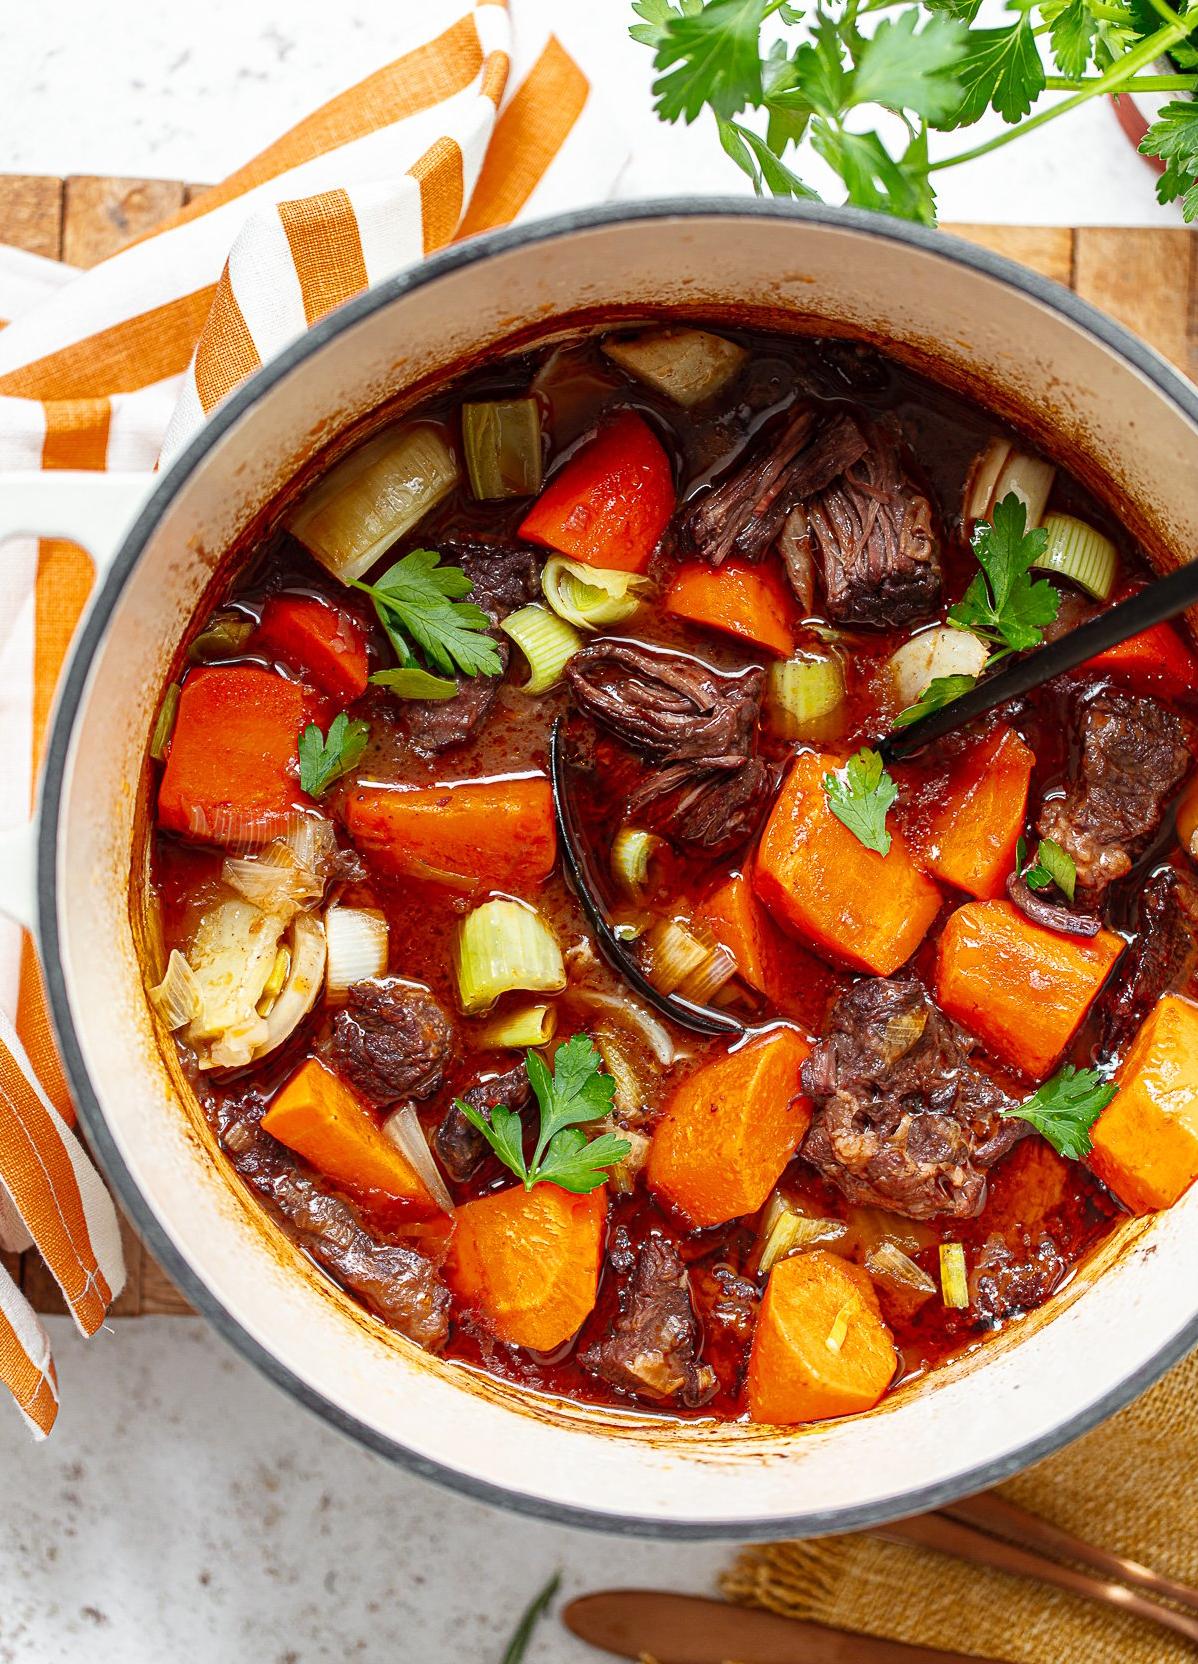  Dive into a hearty and flavorful dish of beef and veggies in robust red wine sauce.